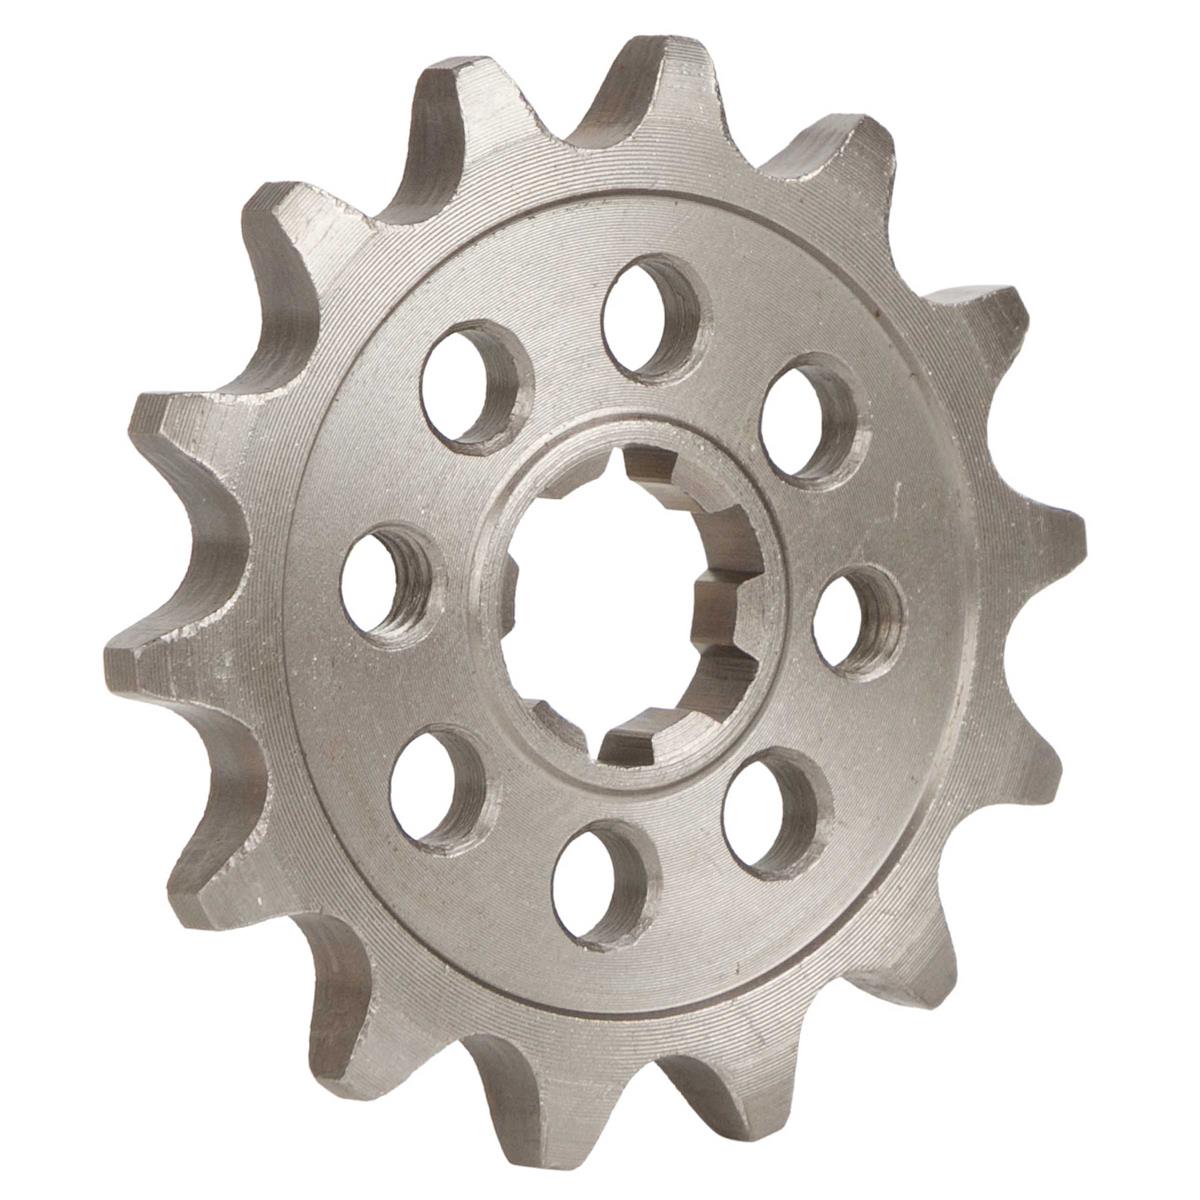 YCF Front Sprocket  for 20 mm Shaft, 420 Pitch